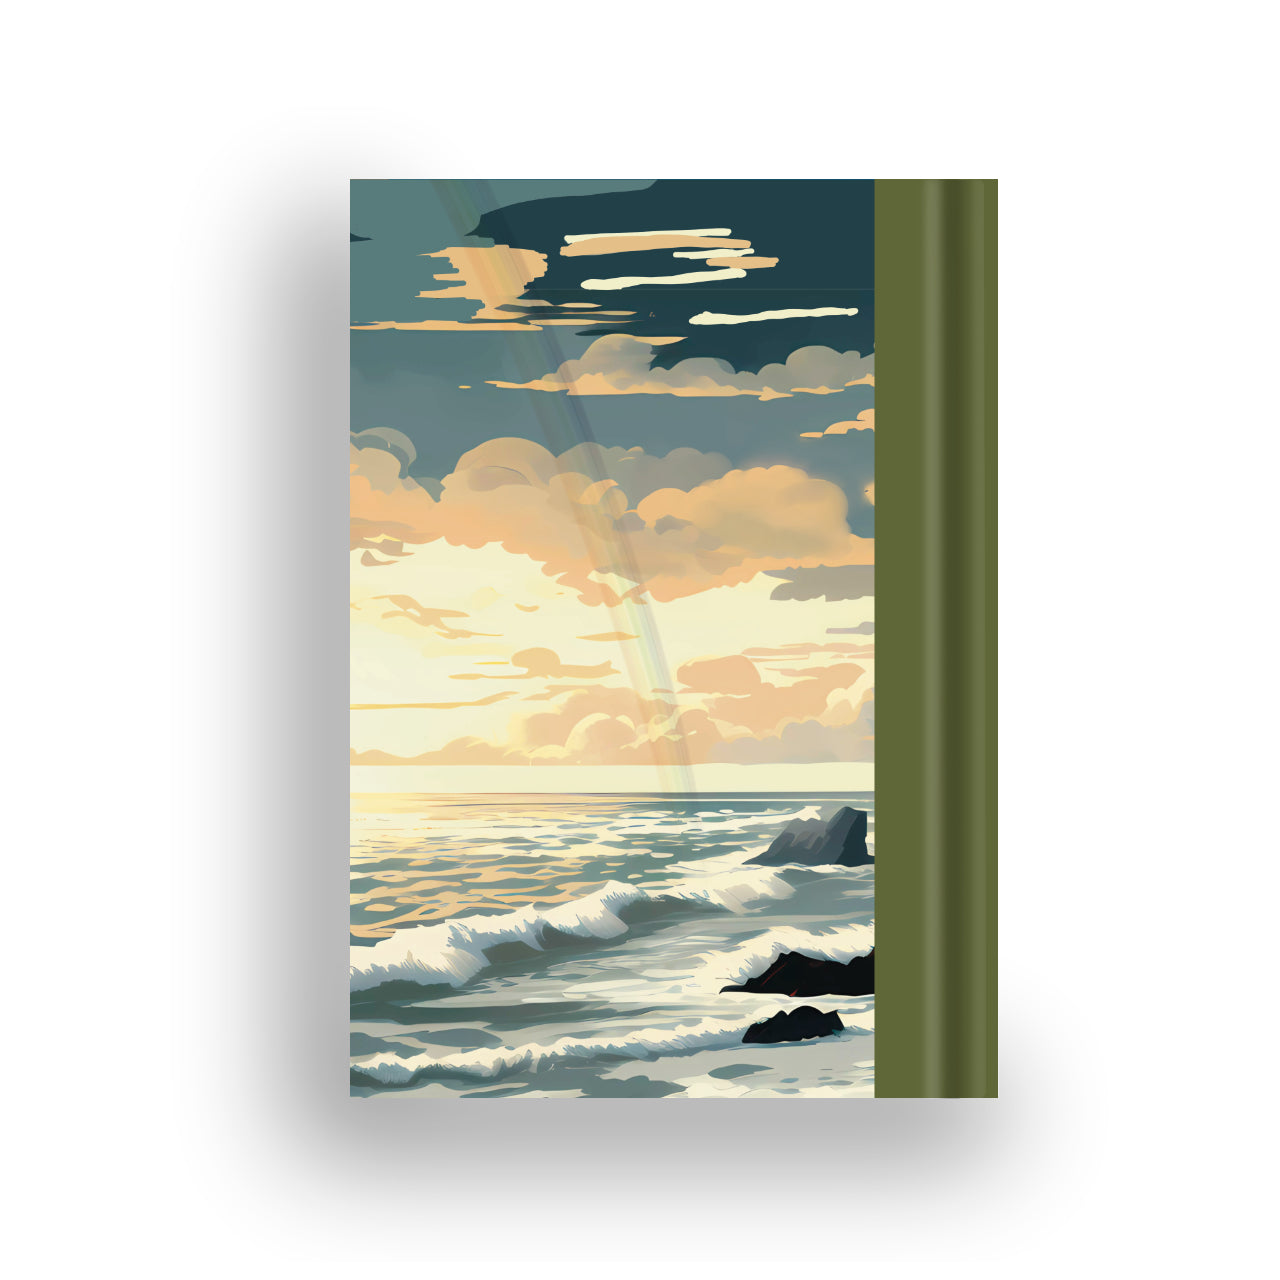 Back cover of the Mussenden notebook with coastal views and a rainbow